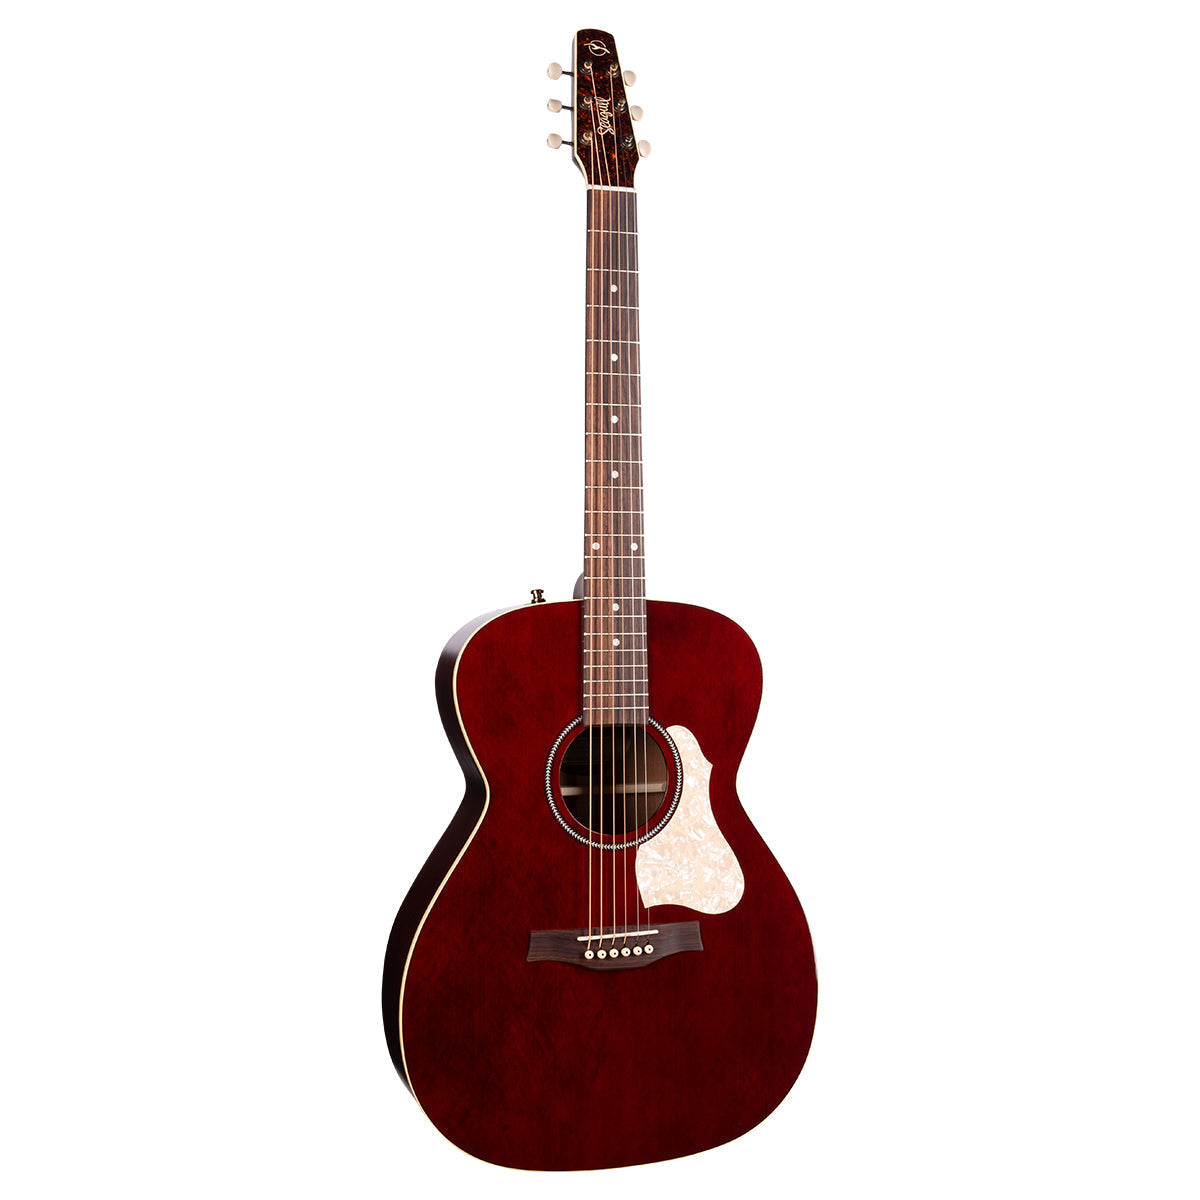 Seagull M6 LTD Electro-Acoustic Guitar ~ Ruby Red,  for sale at Richards Guitars.